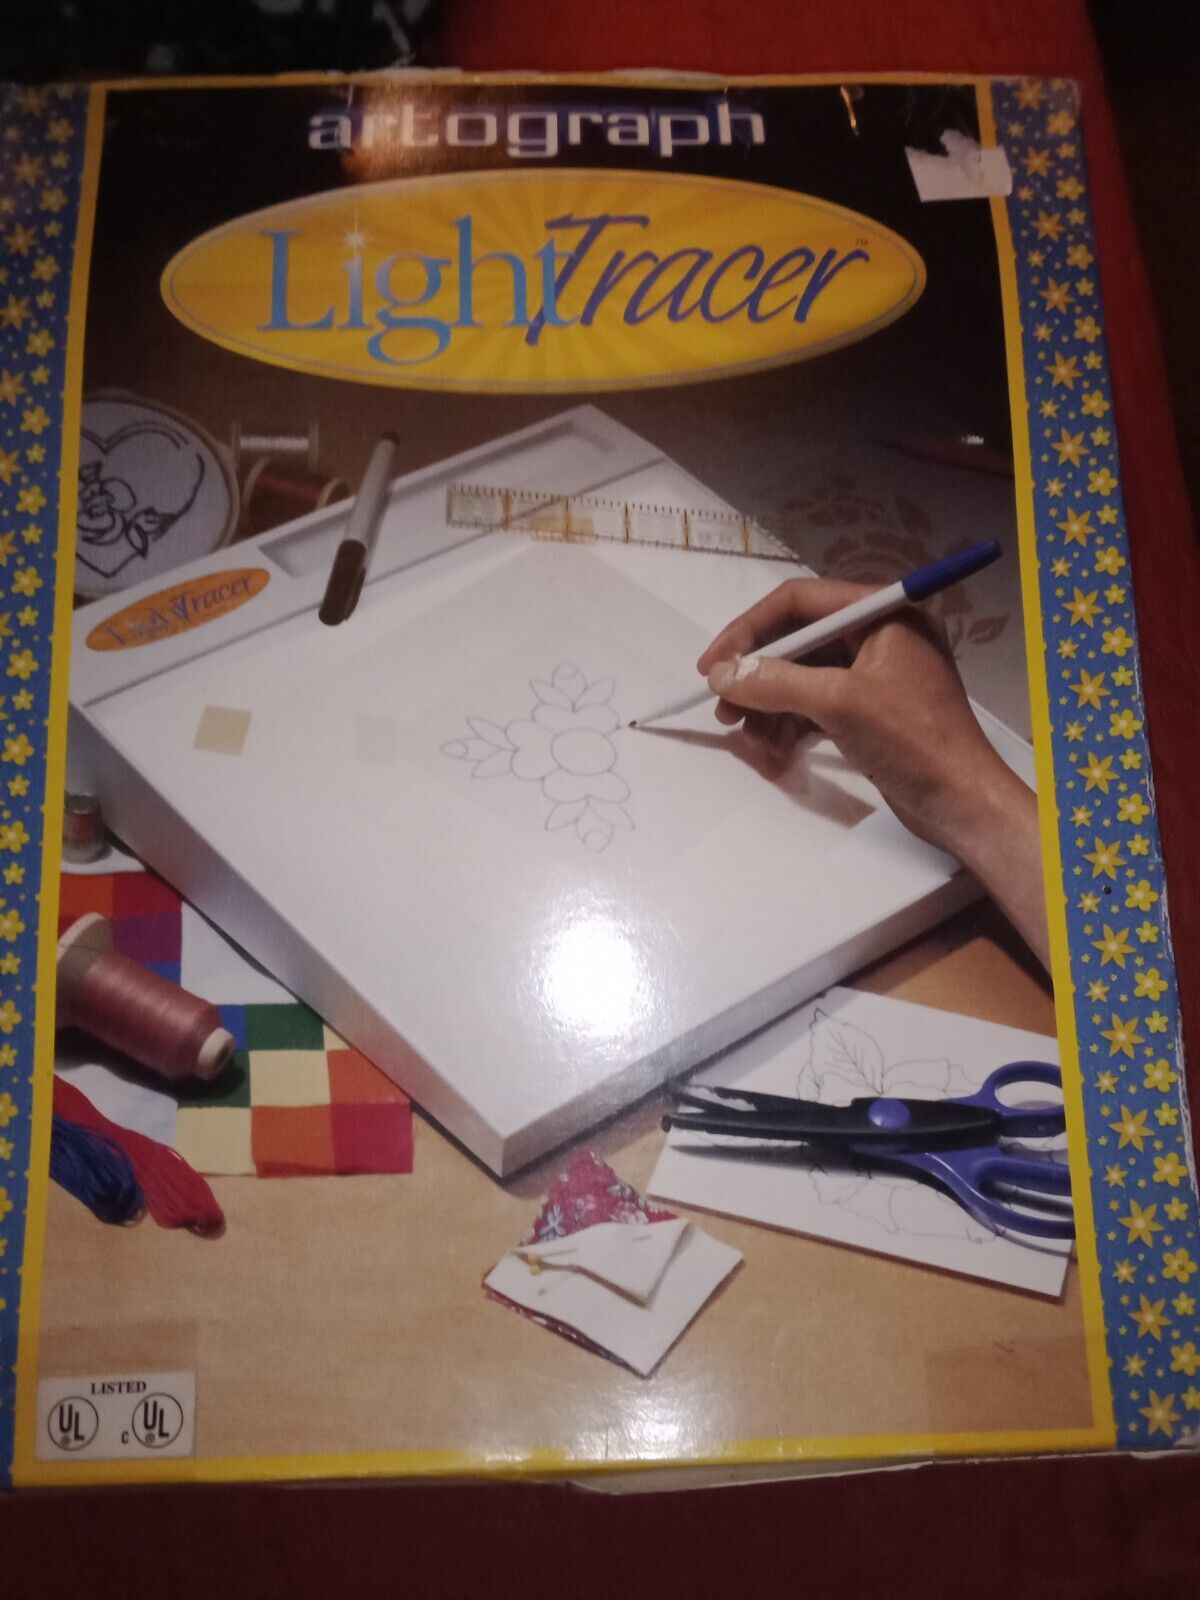 Vintage 1999 Artograph Light Tracer Art 10" X 12" Made In U.s.a.  Nice Condition